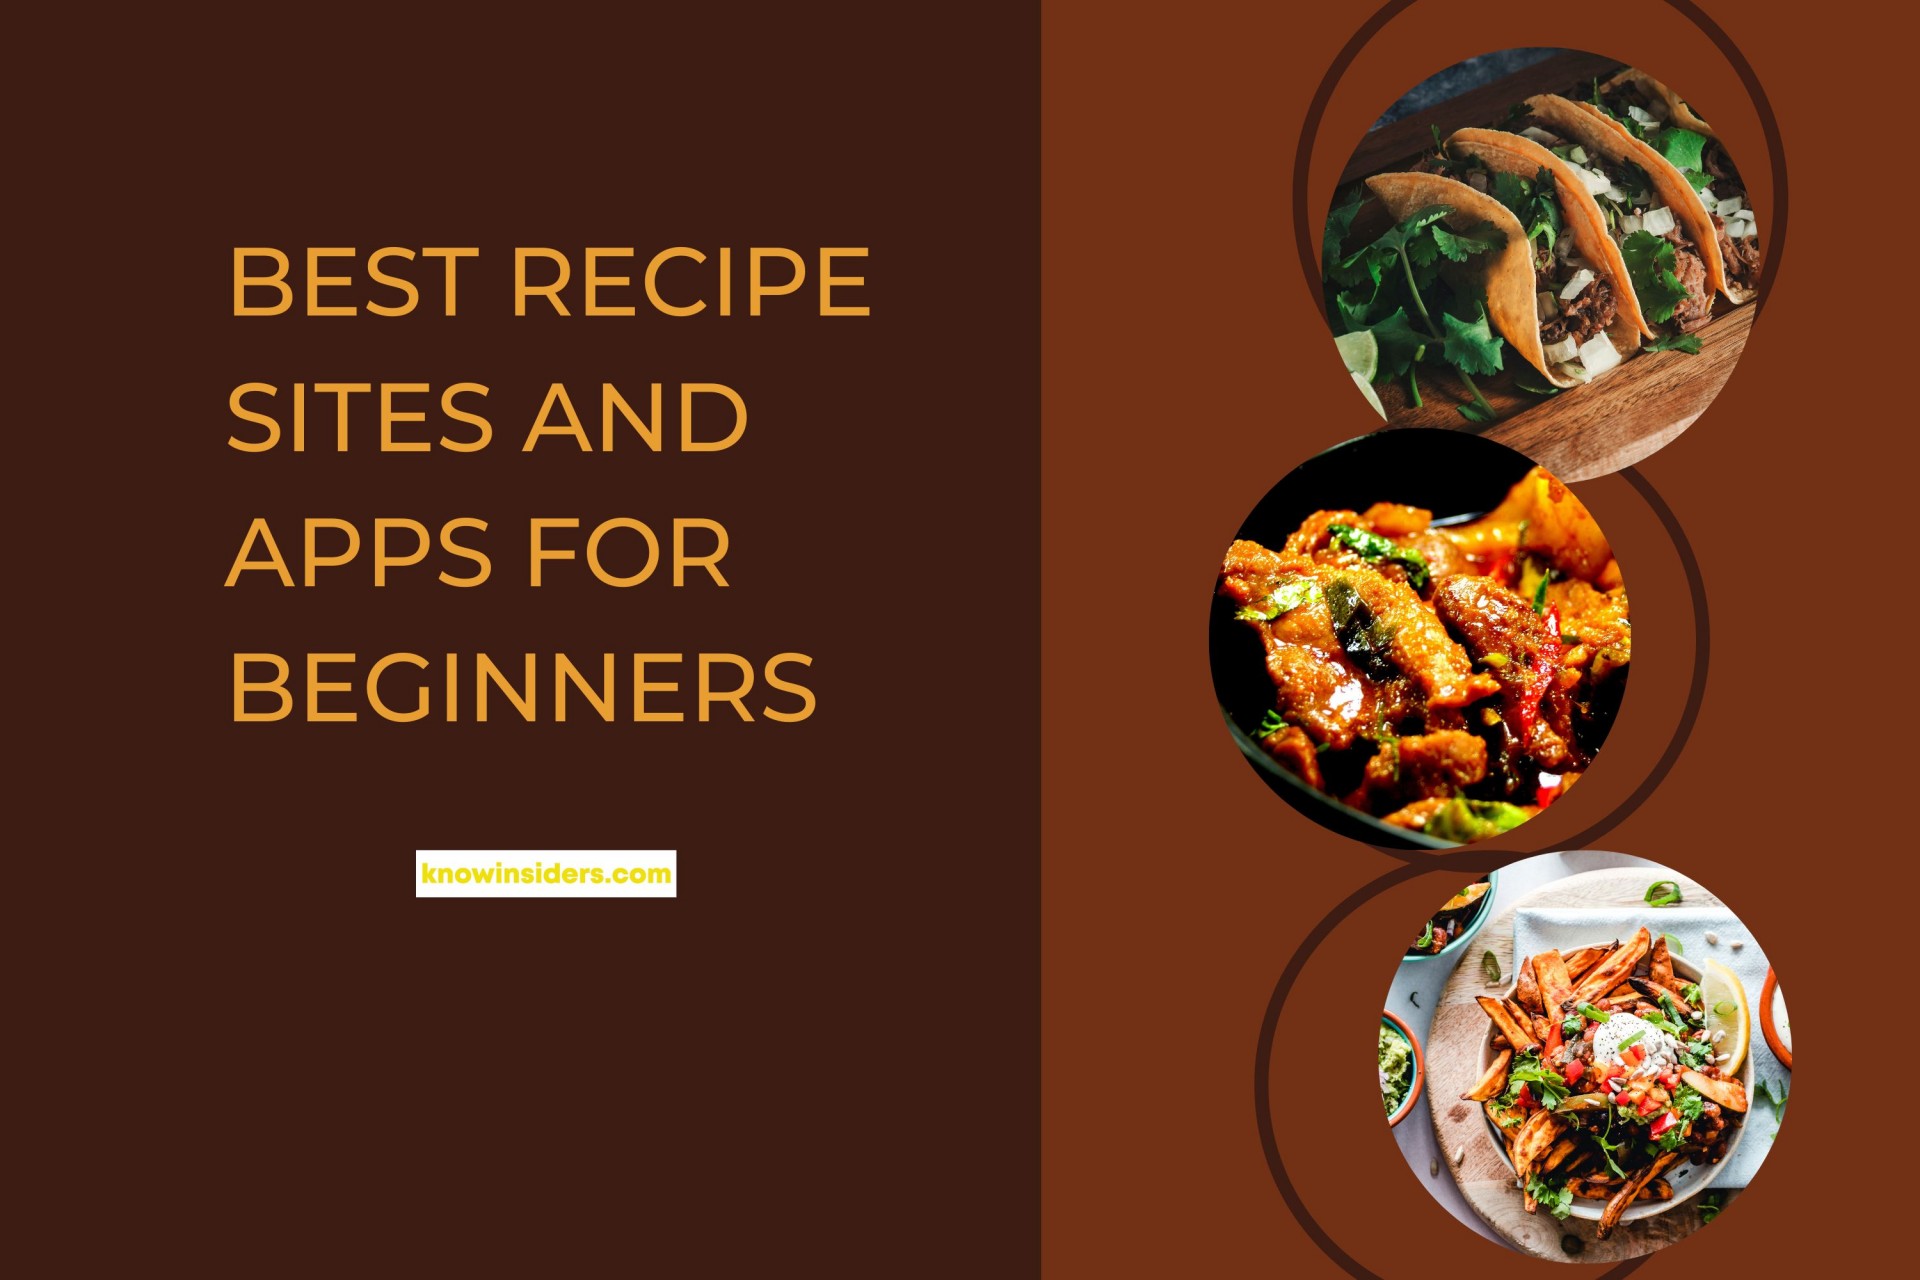 20 Best Recipe Sites And Apps For Novice Cooks